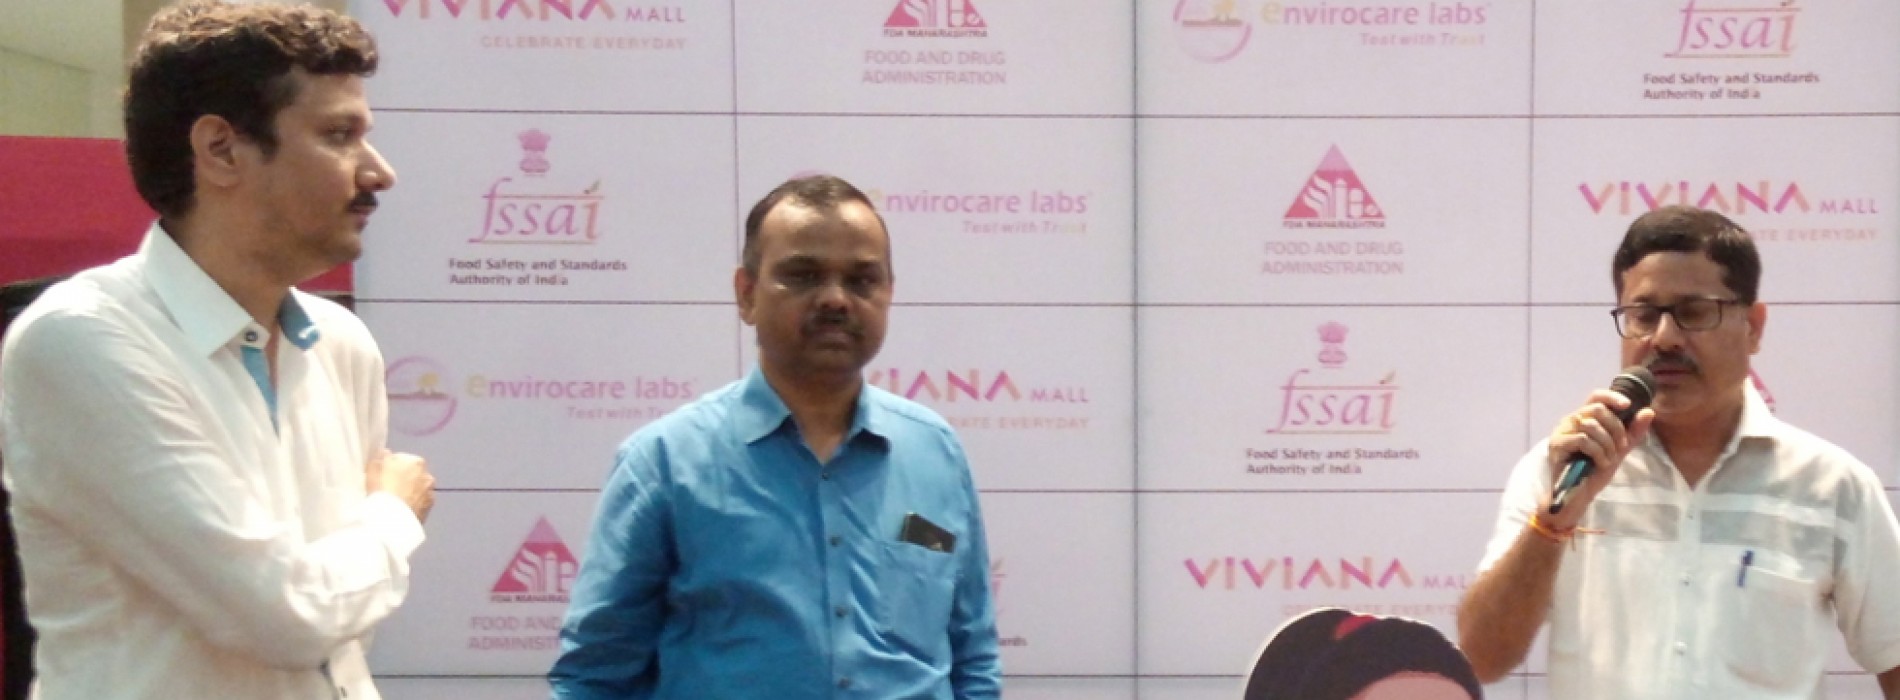 Viviana Mall becomes first mall in India to conduct “FOSTAC” training